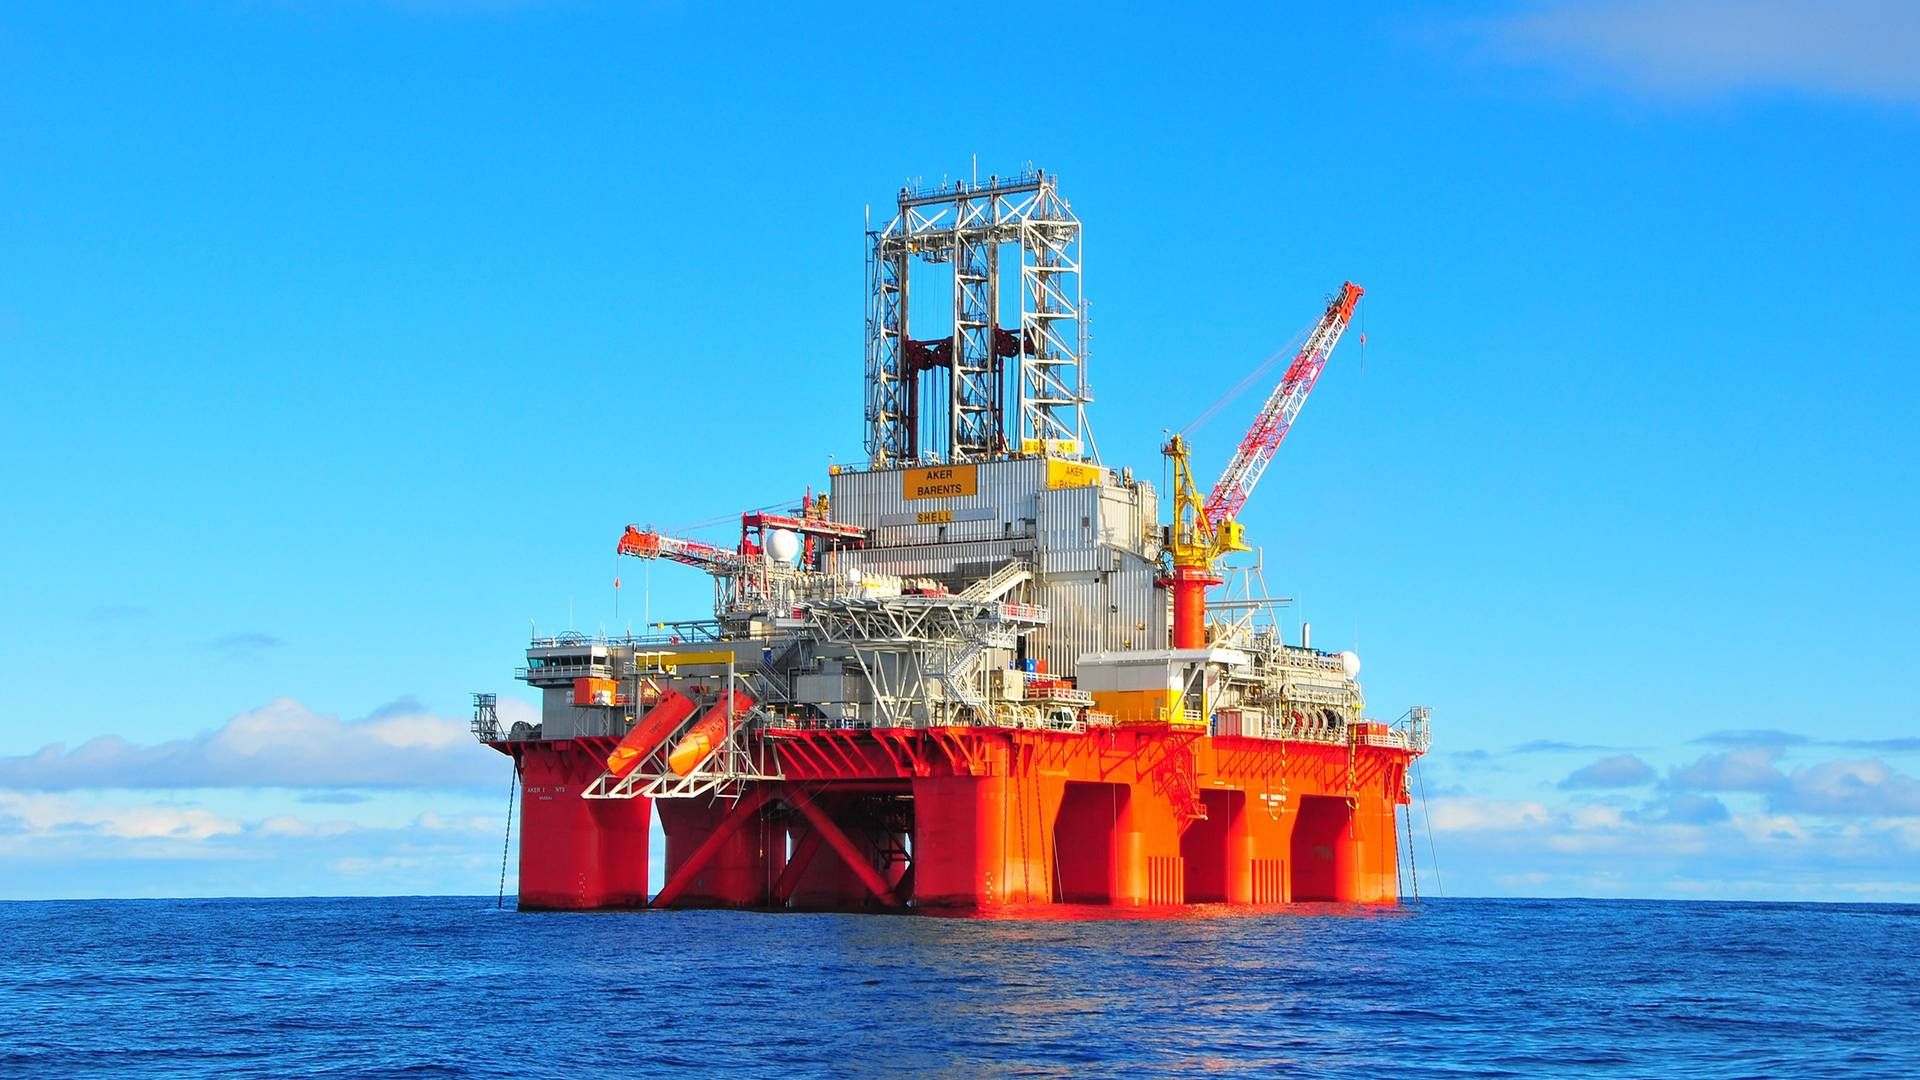 Transocean is one of the world's largest drilling companies and is based in Switzerland. | Photo: Pr/transocean